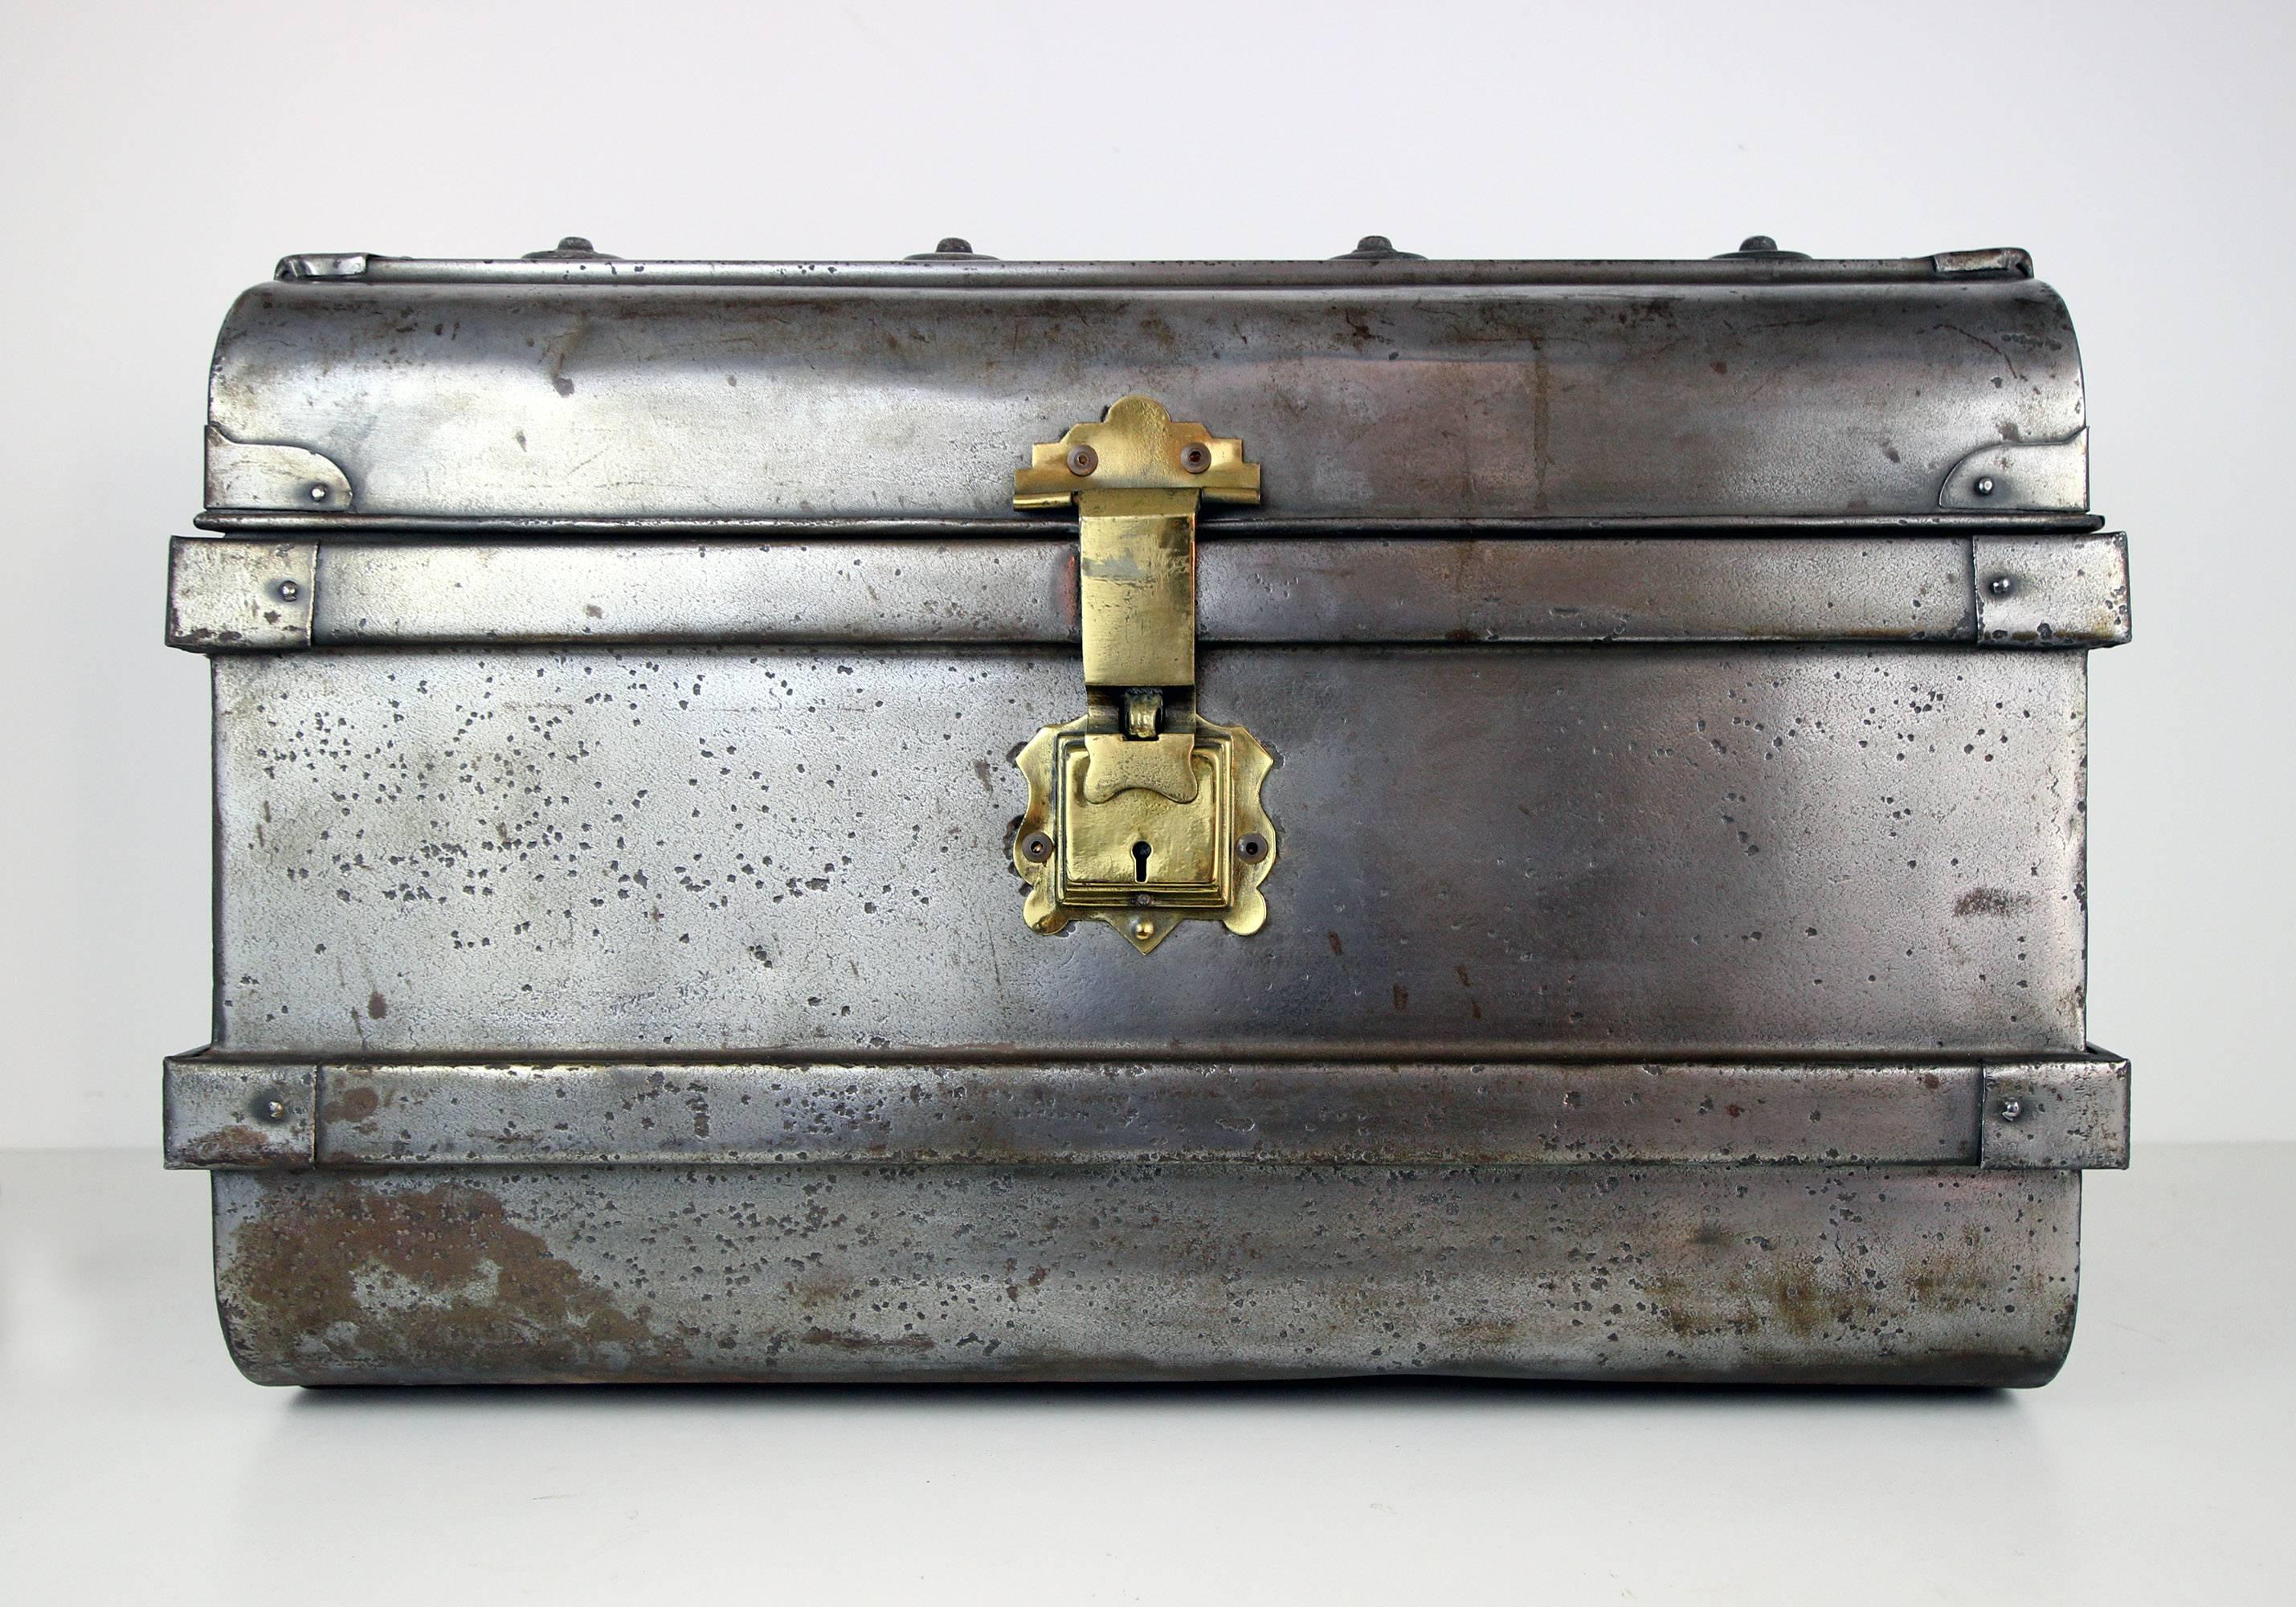 Fine nickel-plated steel trunk with strapping detail, heavy duty handles and original lacquered brass lock, russet brown painted interior. Very sturdy. Probably French, circa 1930.